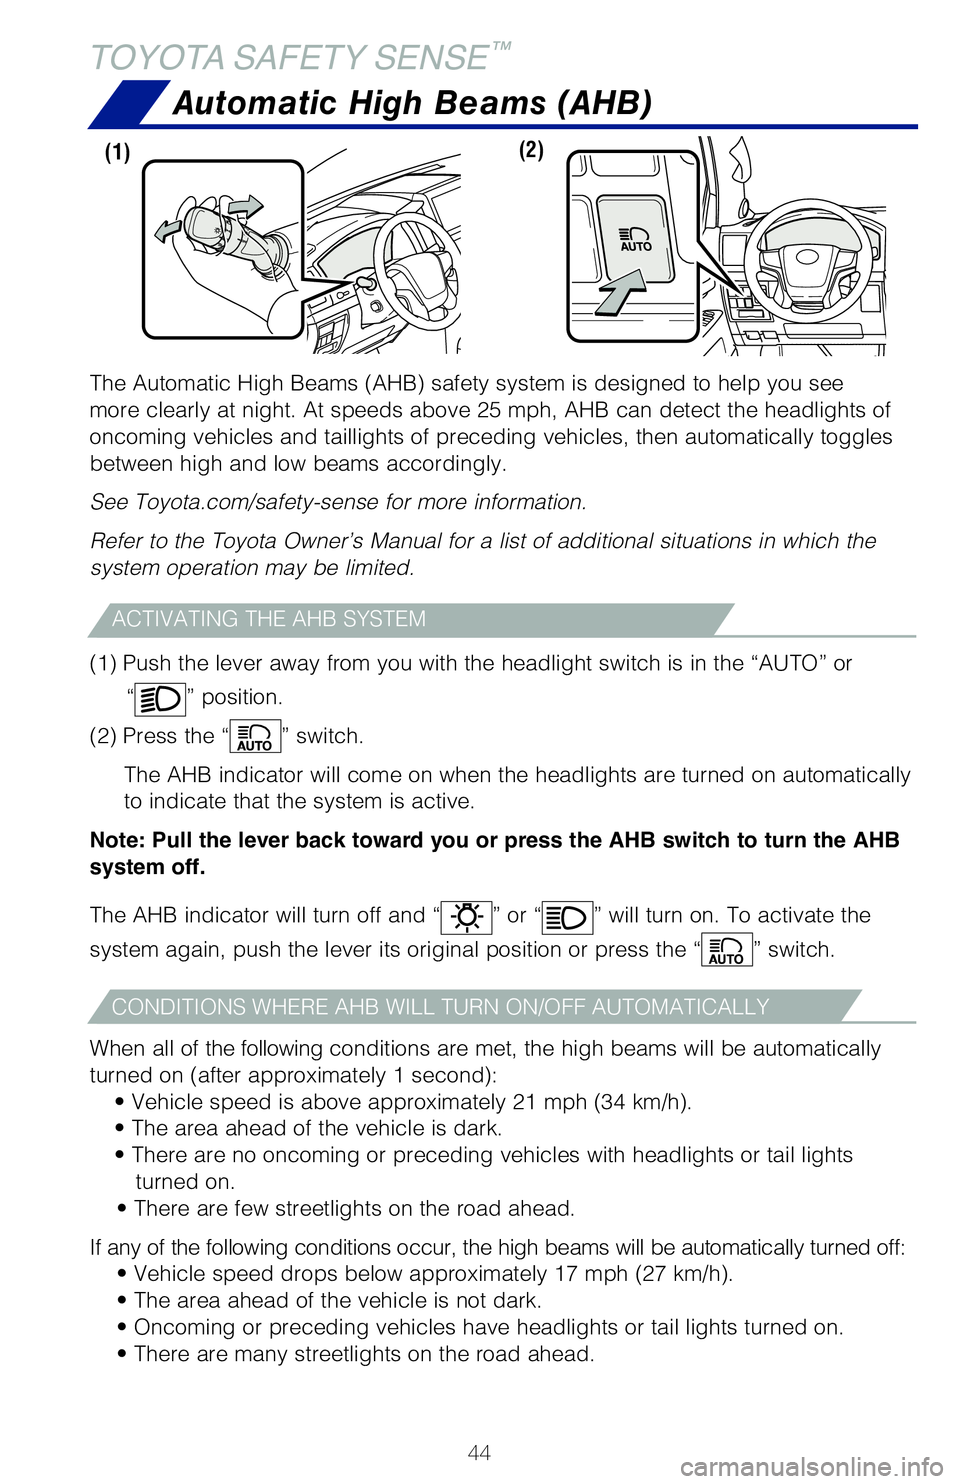 TOYOTA LAND CRUISER 2021  Owners Manual (in English) 44
Automatic High Beams (AHB)
TOYOTA SAFETY SENSE™
ACTIVATING THE AHB SYSTEM
CONDITIONS WHERE AHB WILL TURN ON/OFF AUTOMATICALLY
When all of the following conditions are met, the high beams will be 